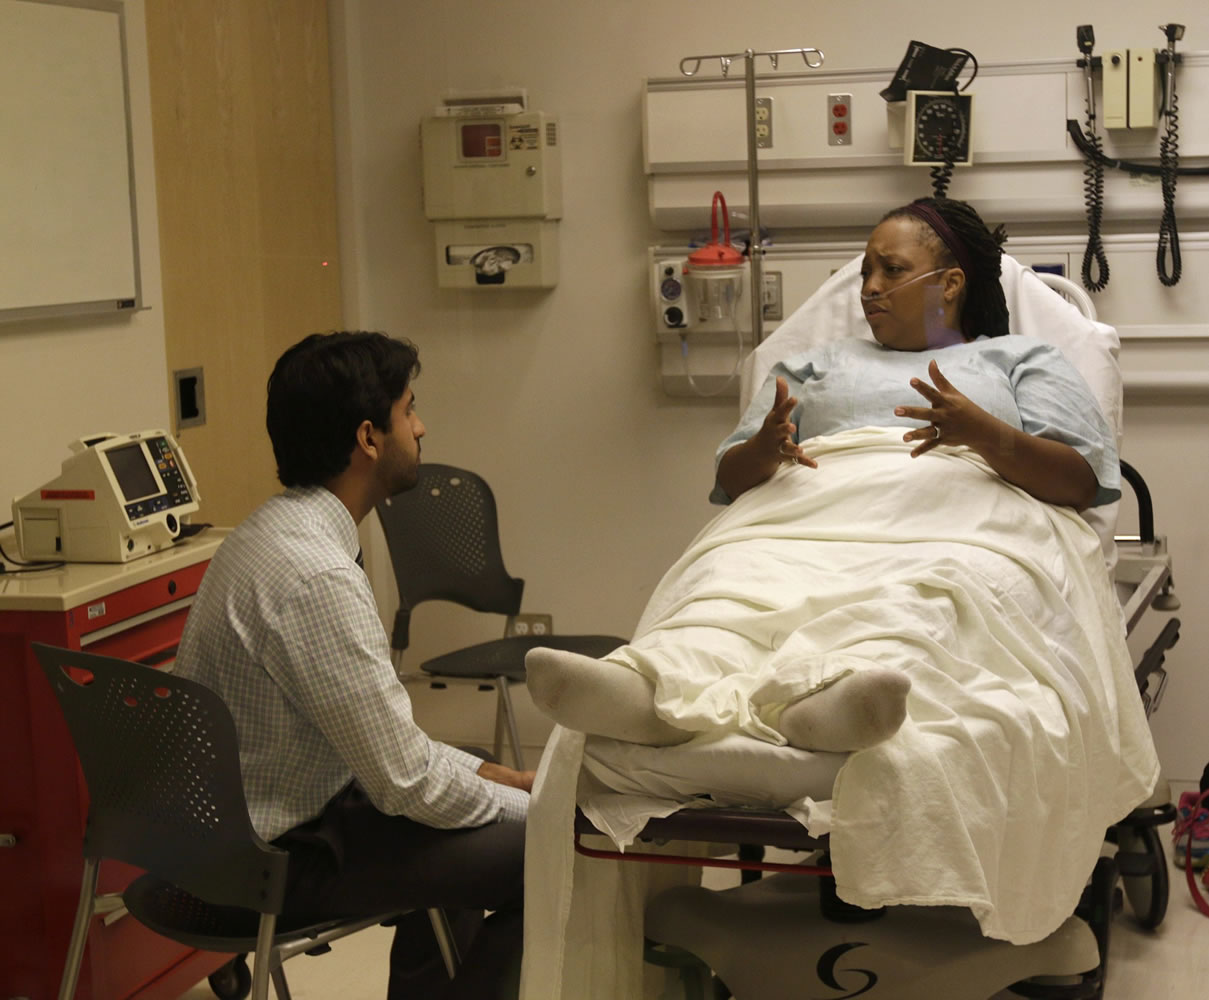 In this June 25, 2014 photo, Atif Sheikh, left, practices giving bad news to a patient played by an actor during an intern boot camp exercise taught by Northwestern Memorial Hospital and Northwestern University's Feinberg School of Medicine in Chicago.